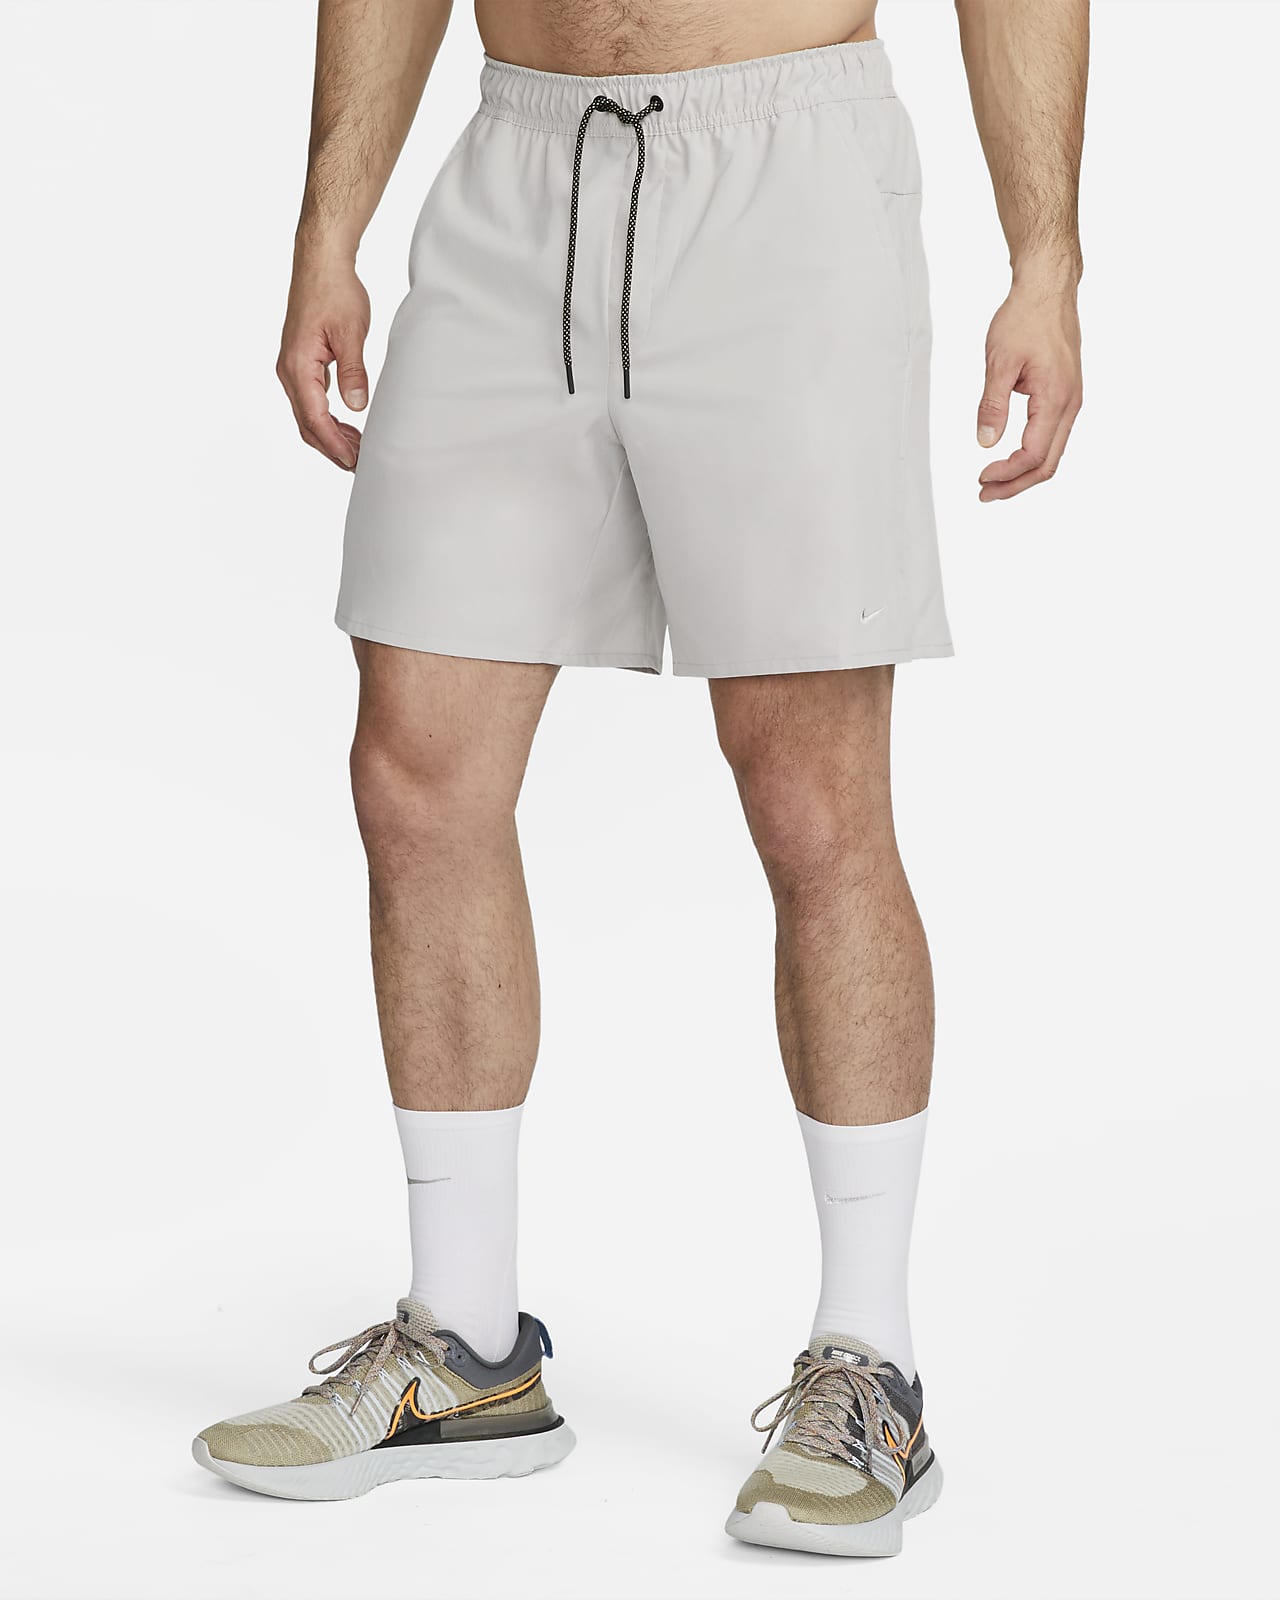 Unlimited D.Y.E. 7" Unlined Shorts. Nike.com